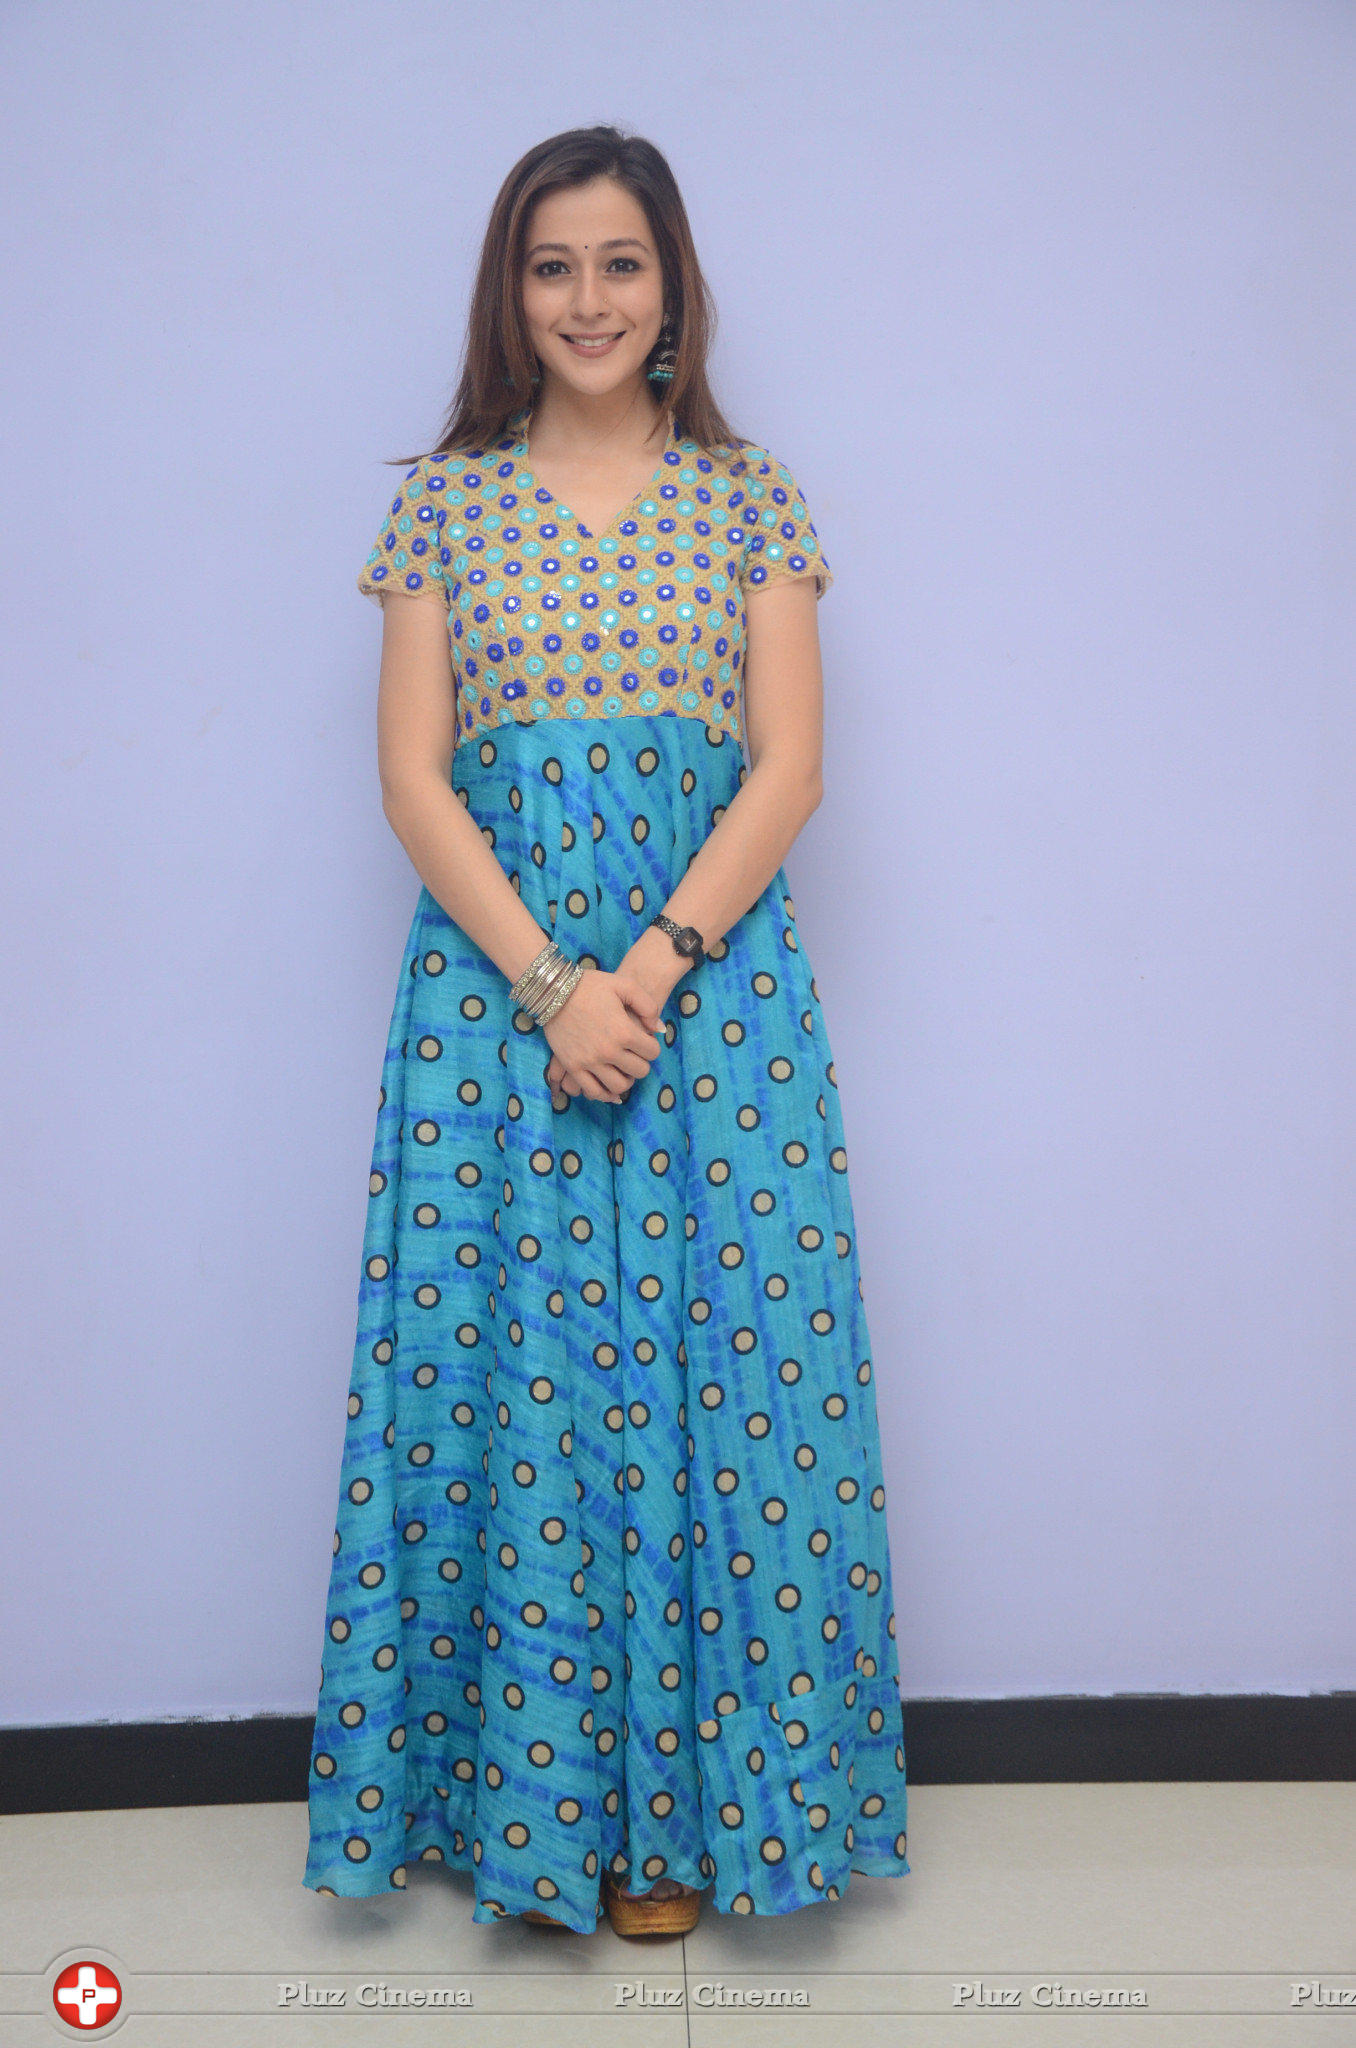 Priyal Gor New Photos | Picture 1372459